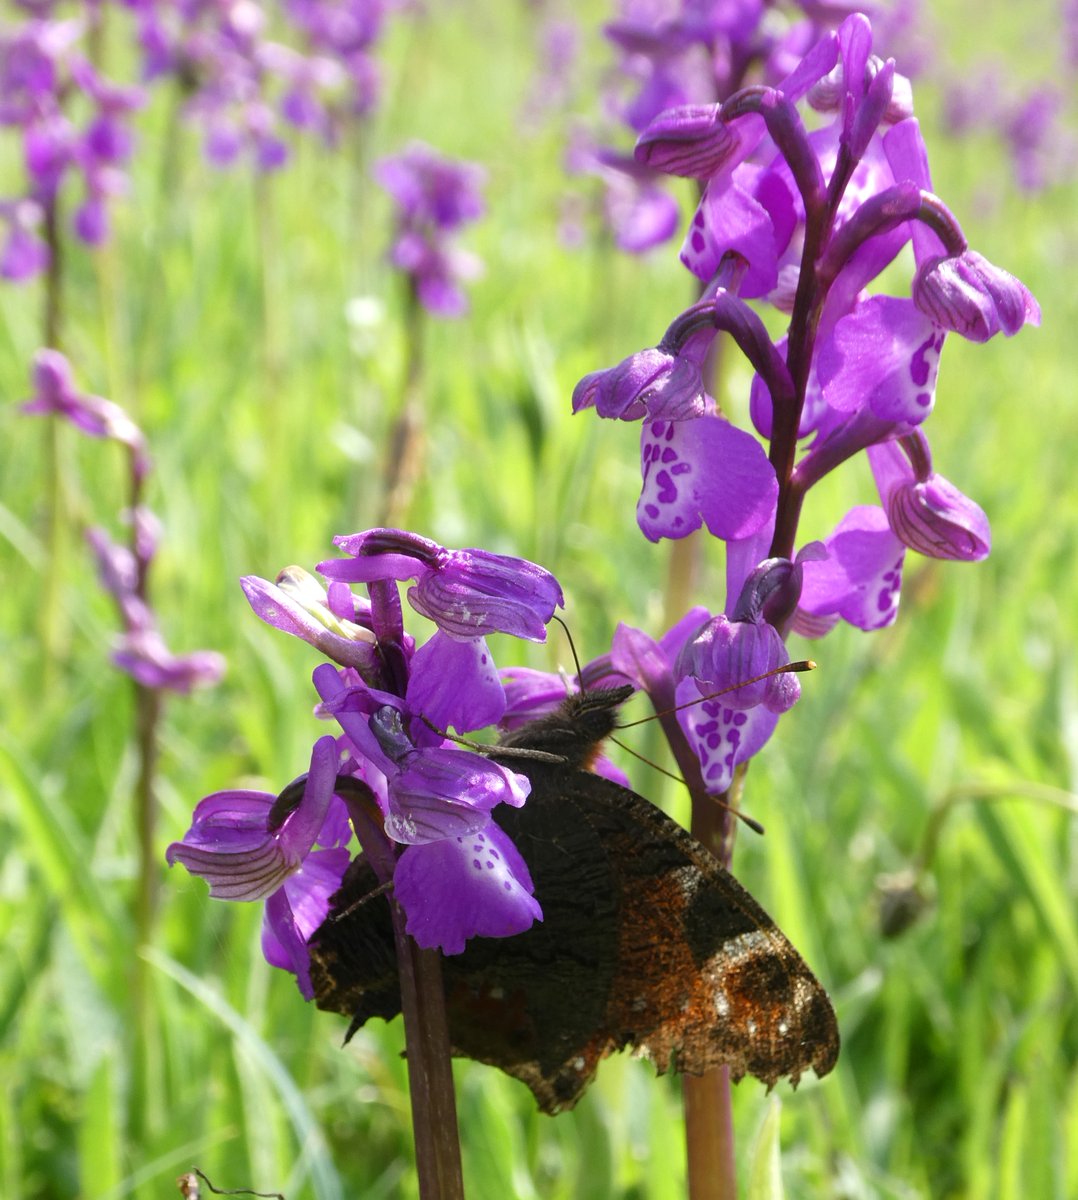 Brimstone & peacock🦋nectaring on green-winged orchids 
💜🦋💜 
#InsectThursday